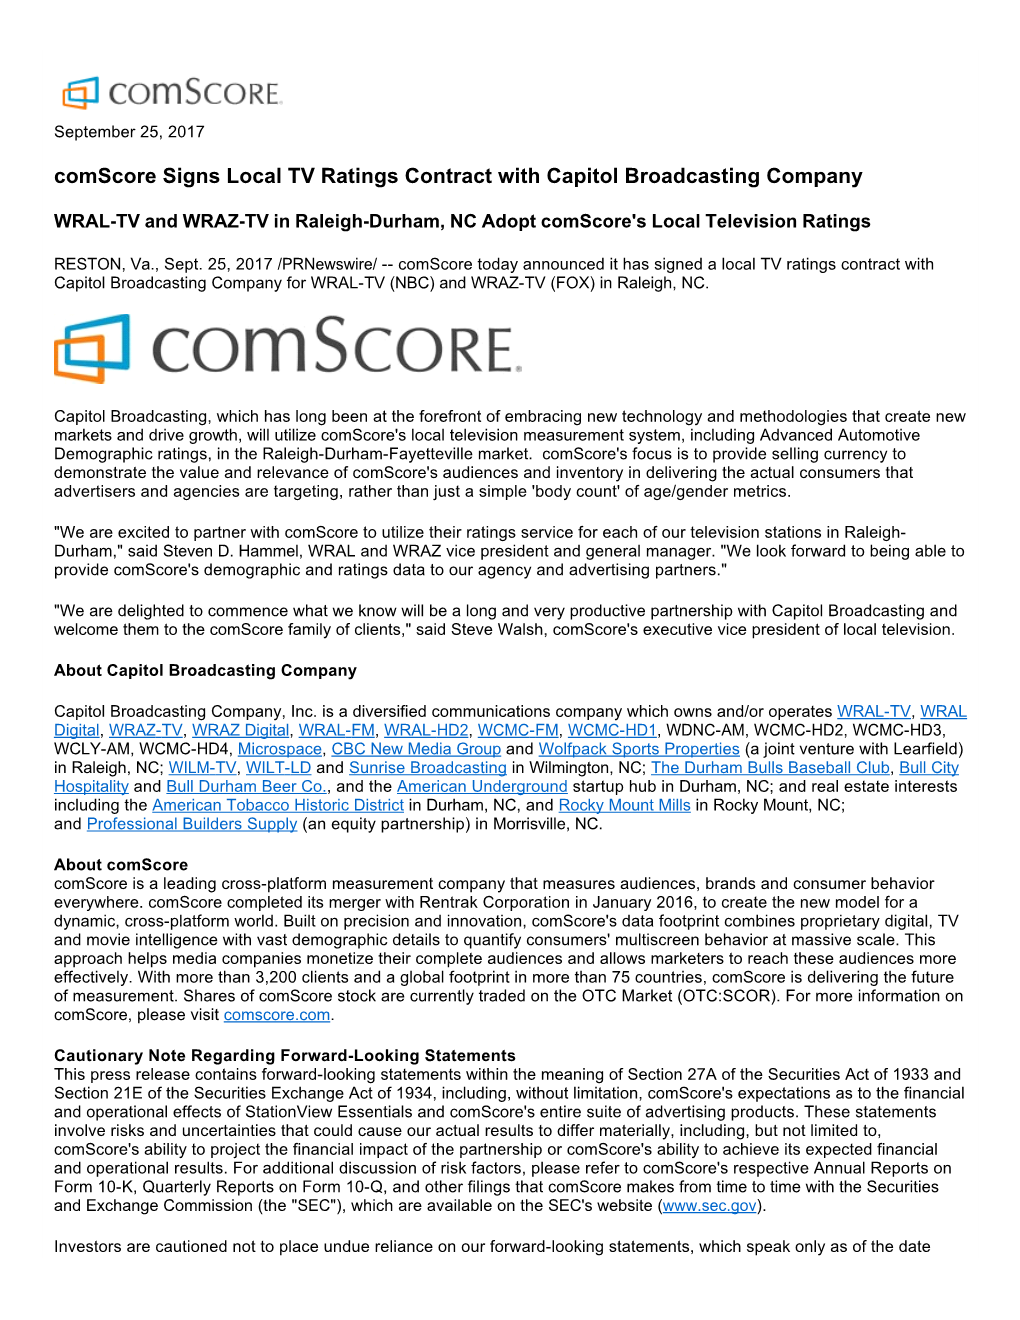 Comscore Signs Local TV Ratings Contract with Capitol Broadcasting Company